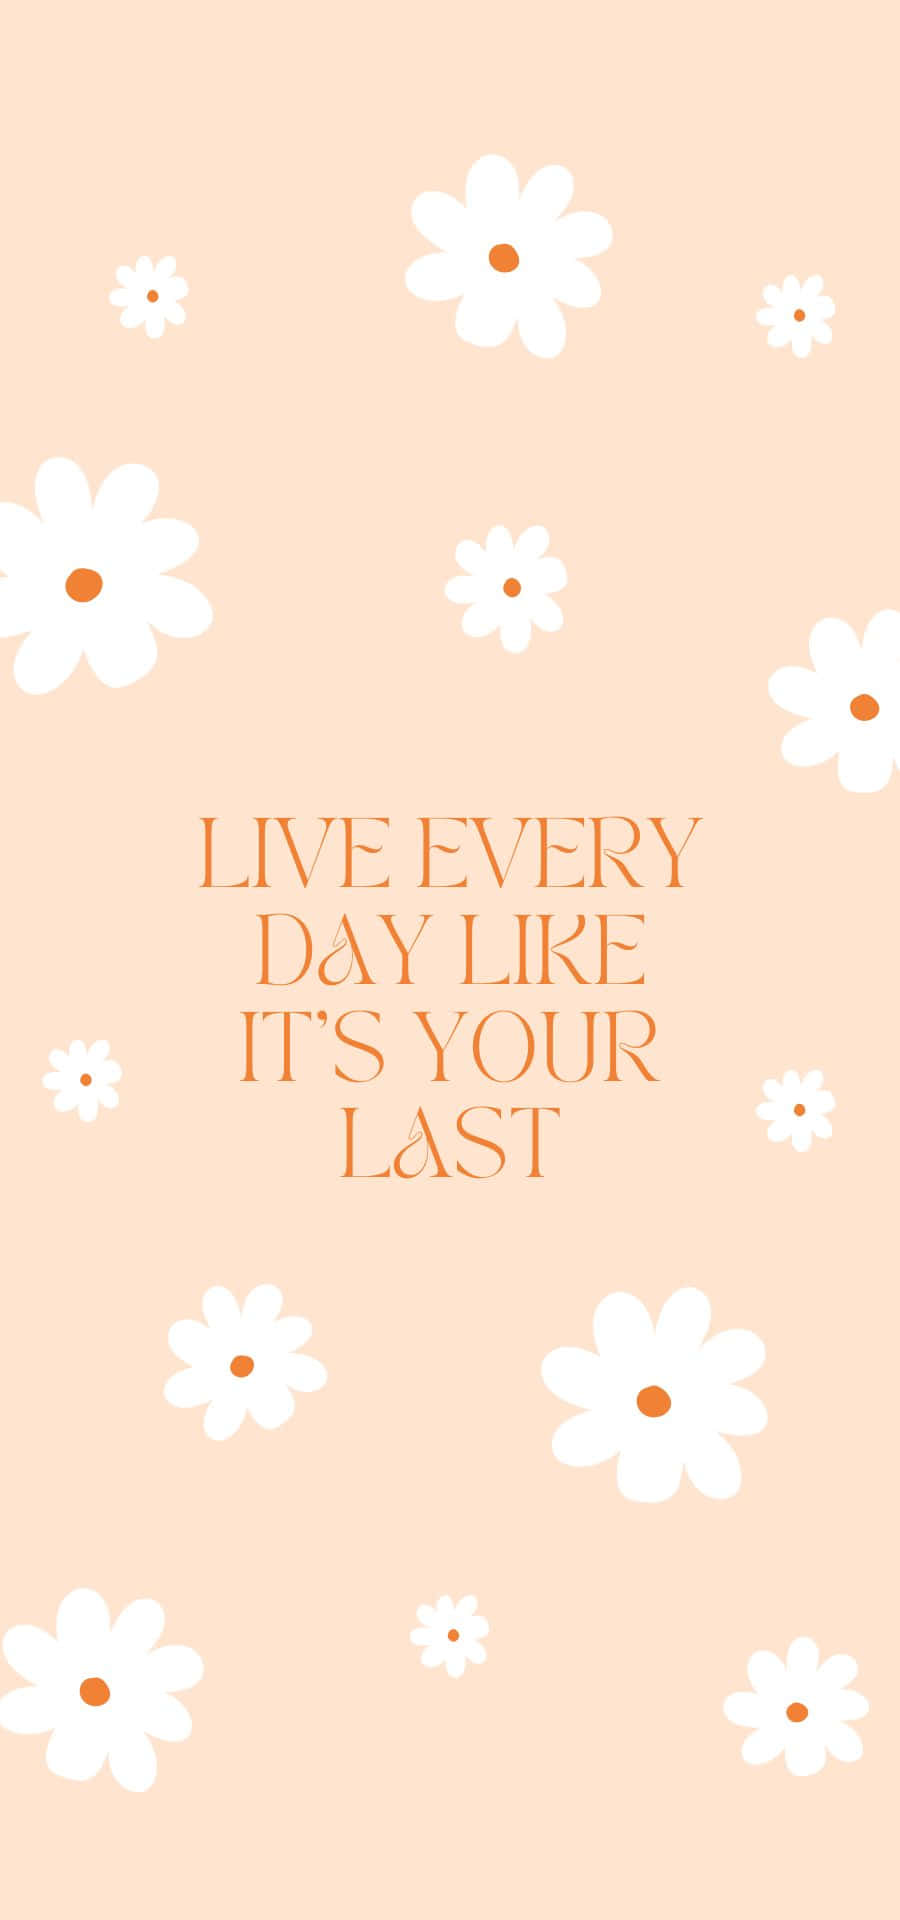 Download Live Every Day Life It's Your Last | Wallpapers.com